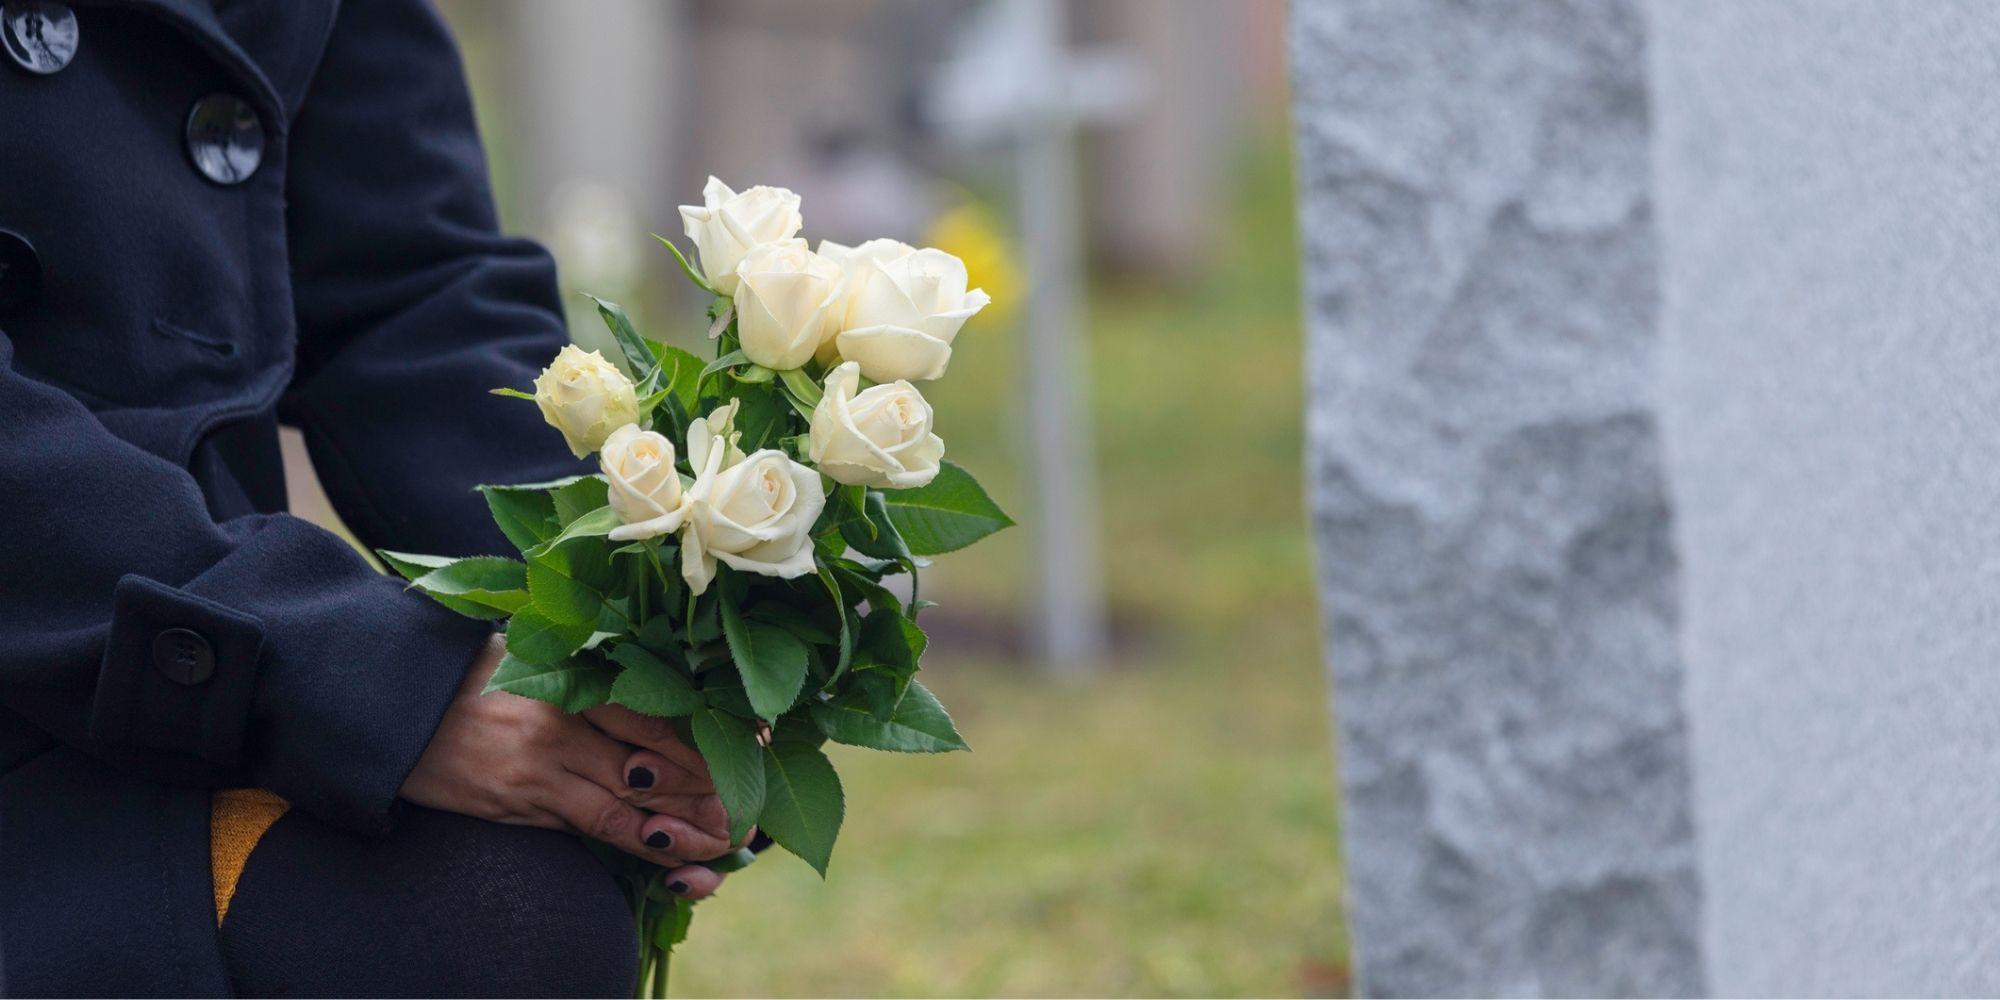 Funeral costs hit a record high of £9,263 last year